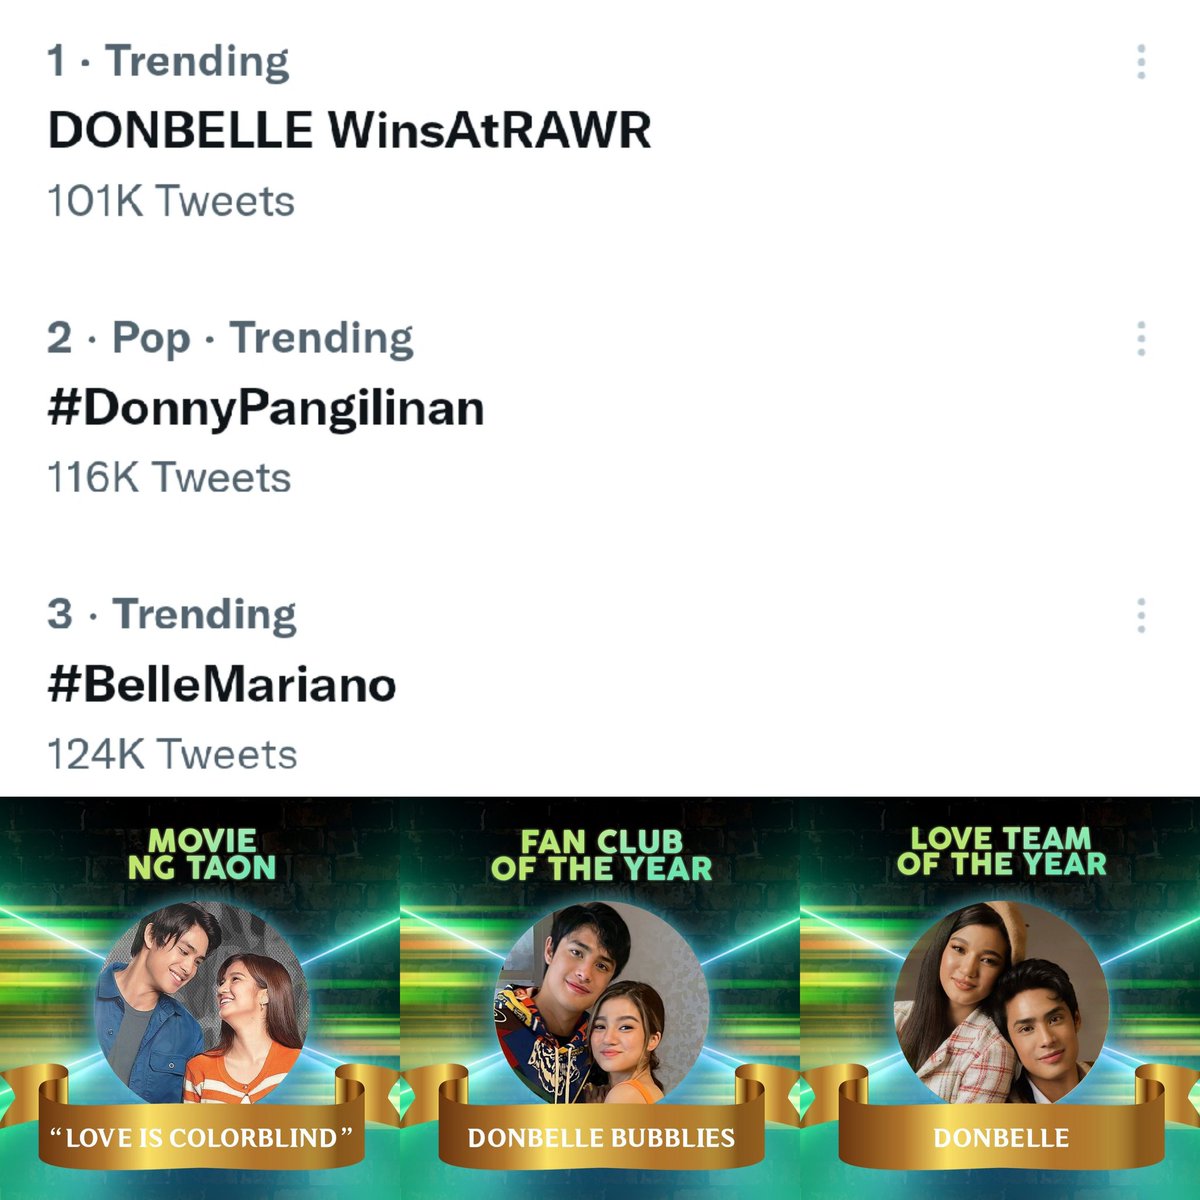 What a night, I'm proud how this fandom grows!!! You'll just expect the unexpected, I LOVE YOU ALL DONBELLE BUBBLIES AND SOLIDS!!! To more years with y'all🖤❤

HAPPY 100K TWEETS!!!!

DONBELLE WinsAtRAWR
#DonnyPangilinan | #BelleMariano
#DonBelle | #DONBELLEmpire
#RAWRAWARDS2022